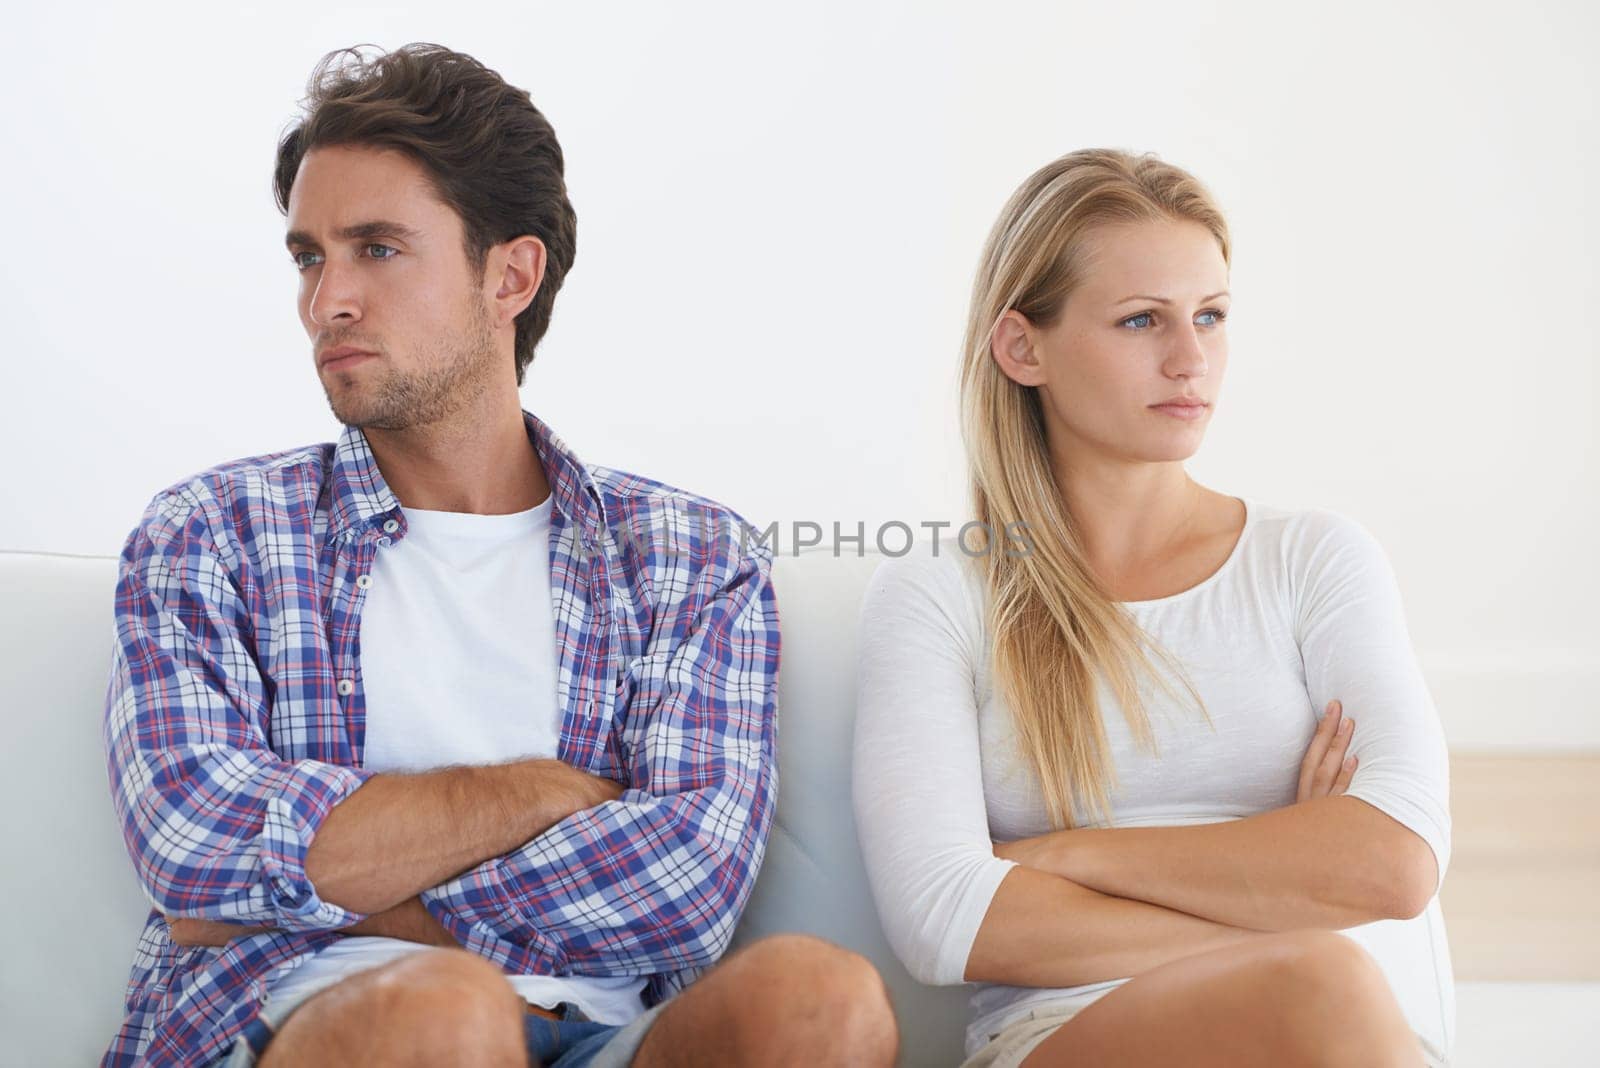 Communication breakdown. A disagreeing couple sitting with arms crossed and looking away from each other in upset